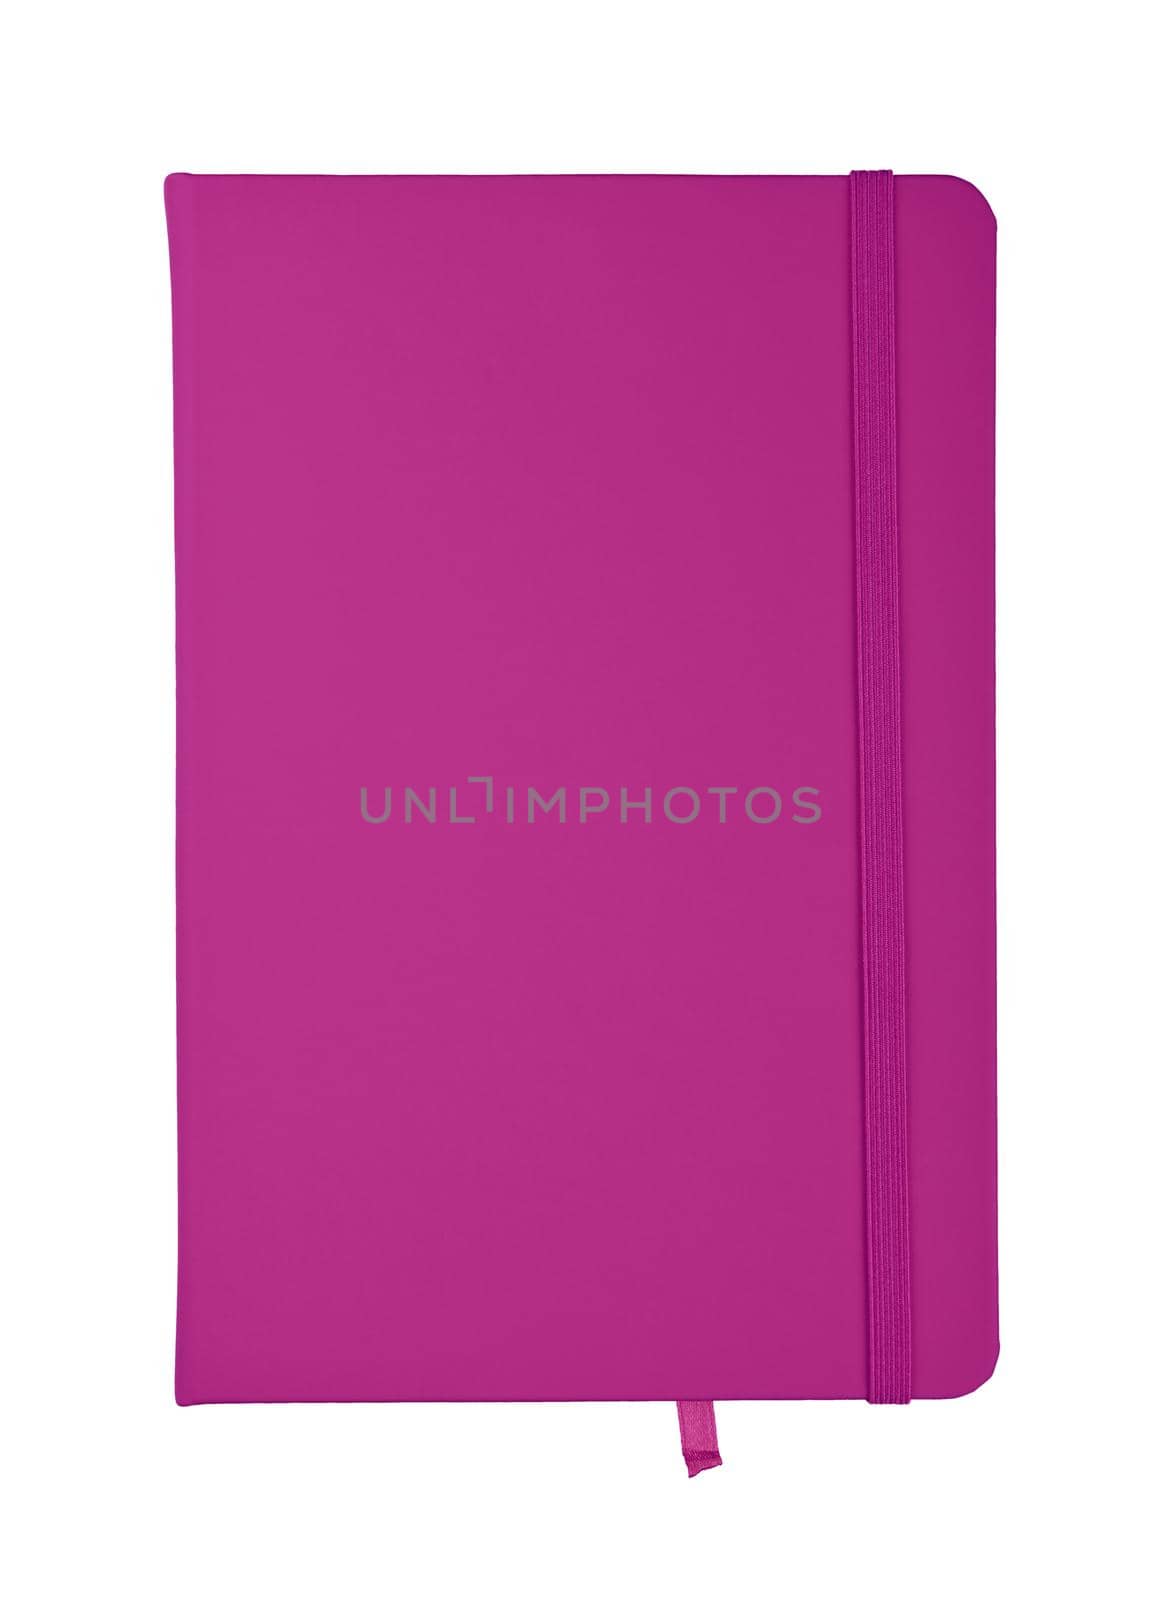 Purple leather cover notebook isolated on white by BreakingTheWalls